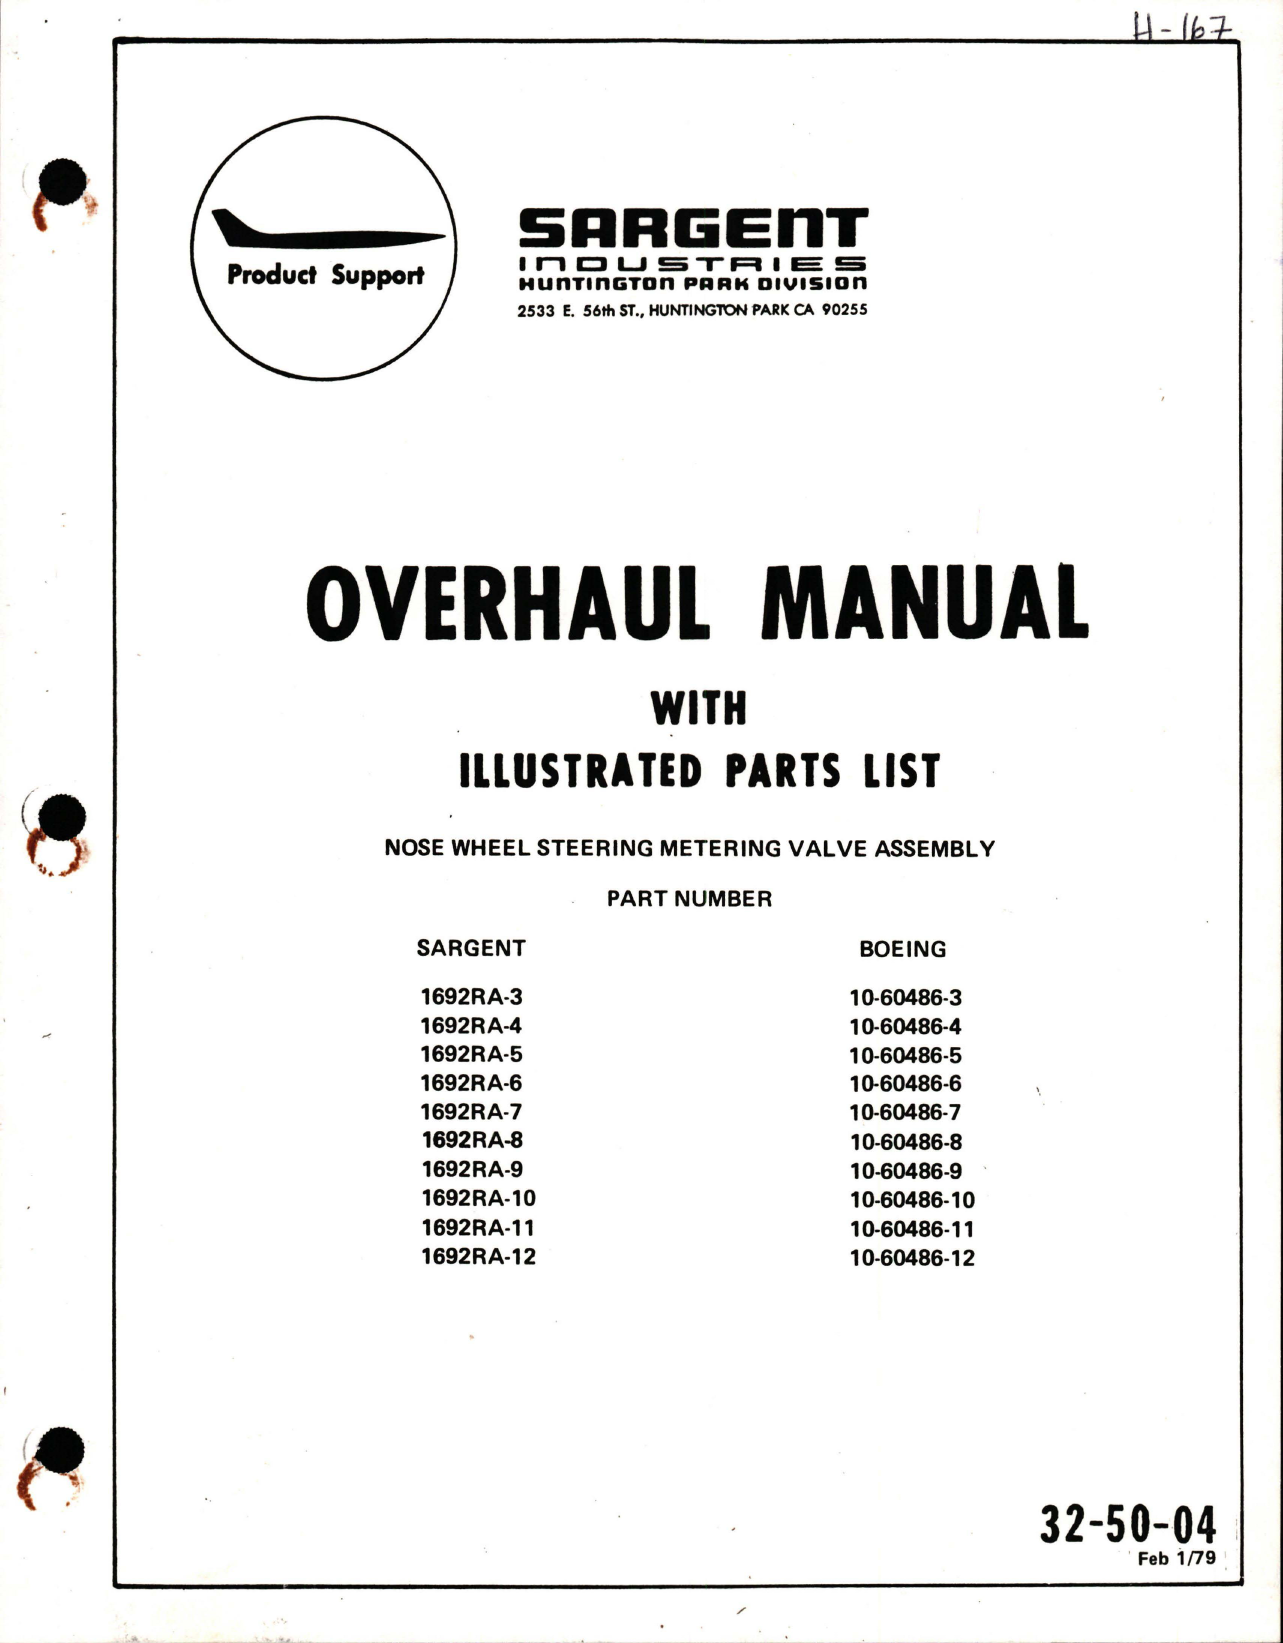 Sample page 1 from AirCorps Library document: Overhaul Manual with Illustrated Parts List for Nose Wheel Steering Metering Valve Assembl